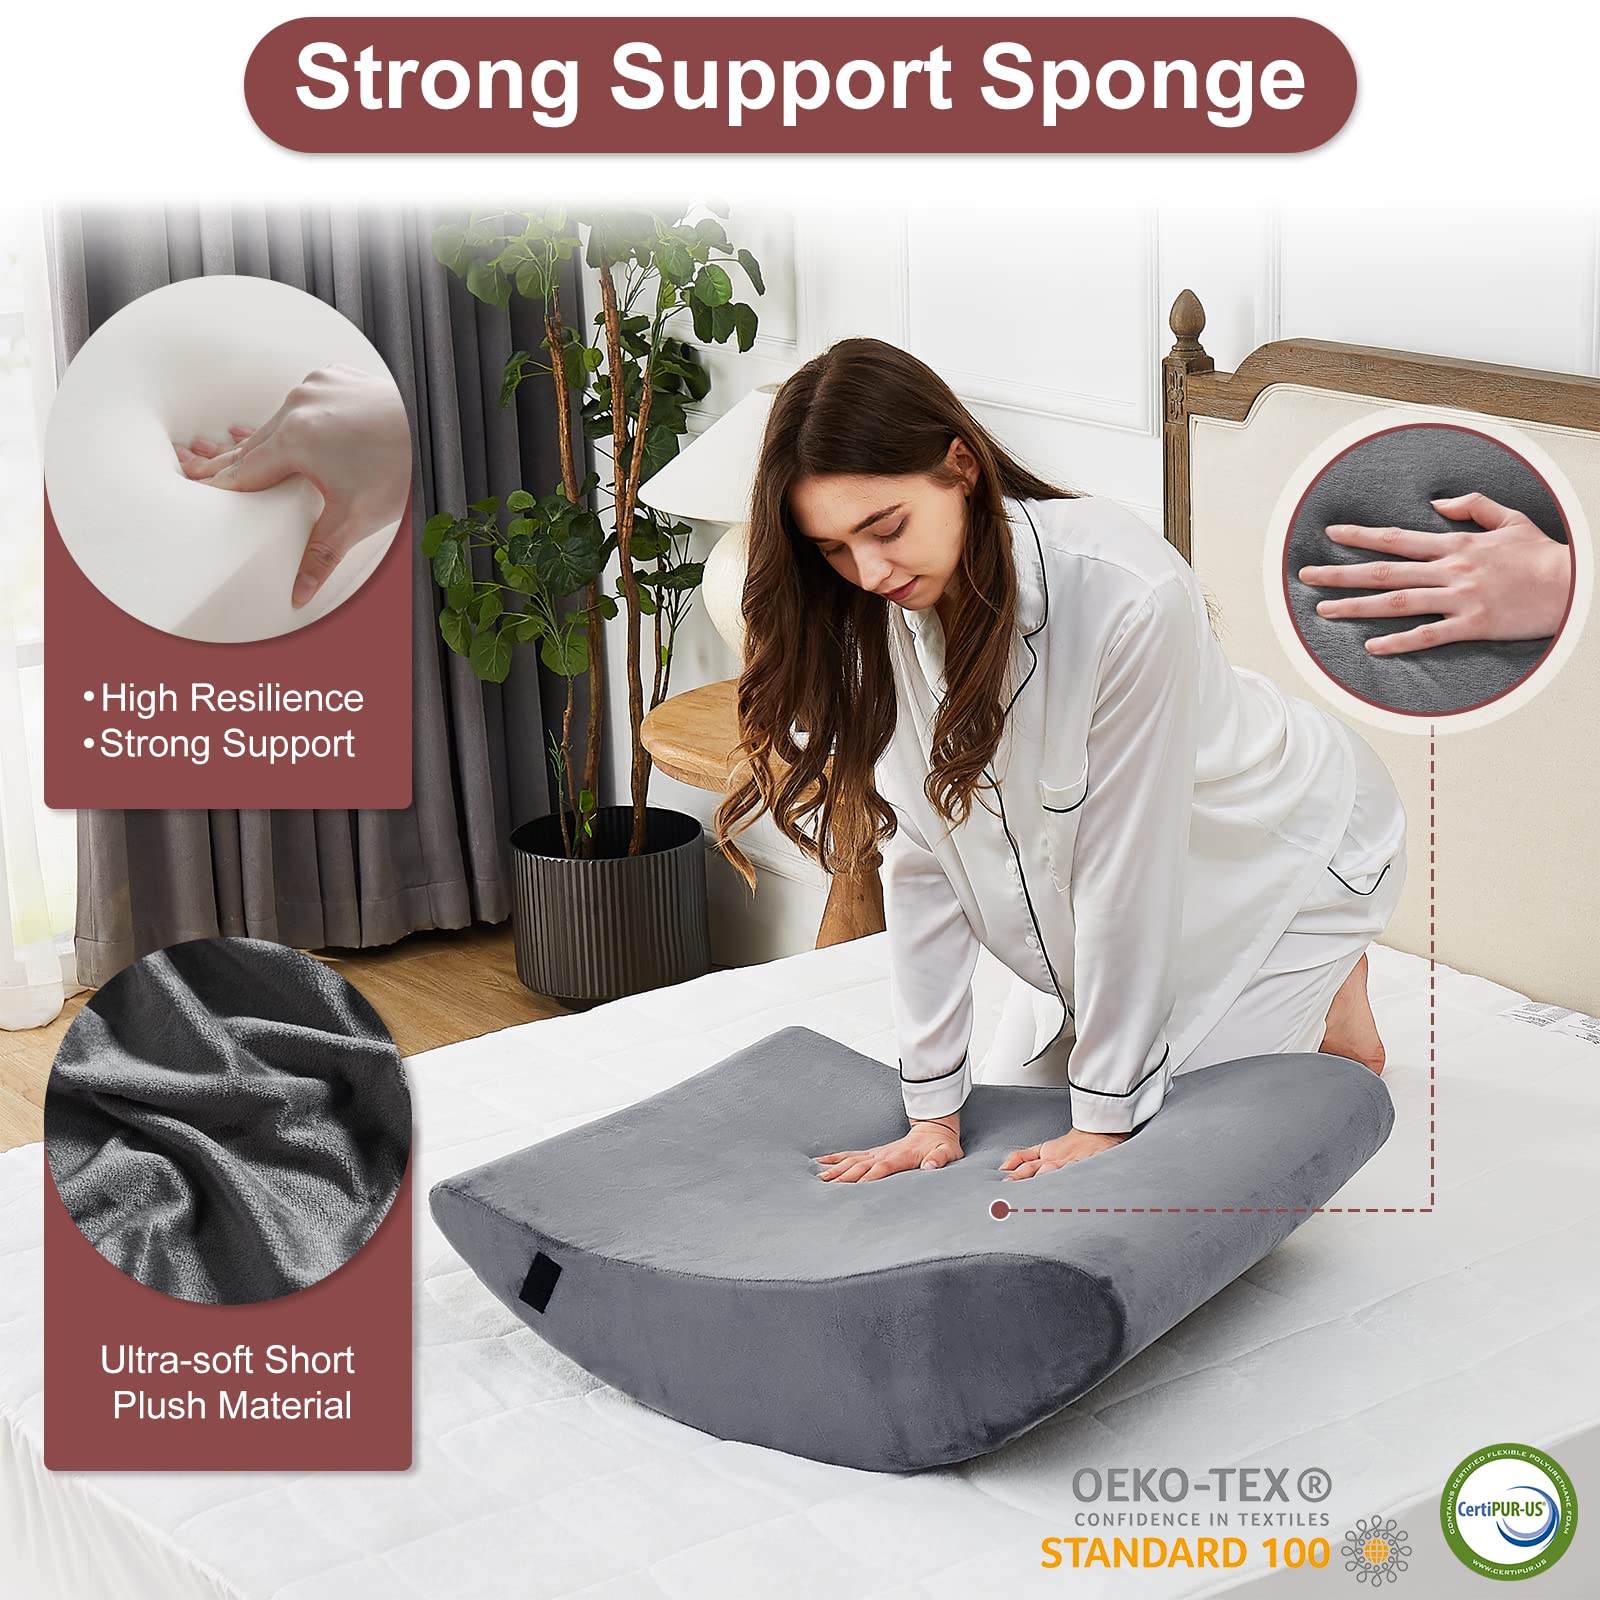 HomeMate 6 PCS Orthopedic Bed Wedge Pillow Set,Post Surgery Foam Pillow for Neck, Back and Leg Pain Relief, Triangle Sit Up Pillow Adjustable- Anti Snoring, Heartburn, Acid Reflux & GERD Sleeping